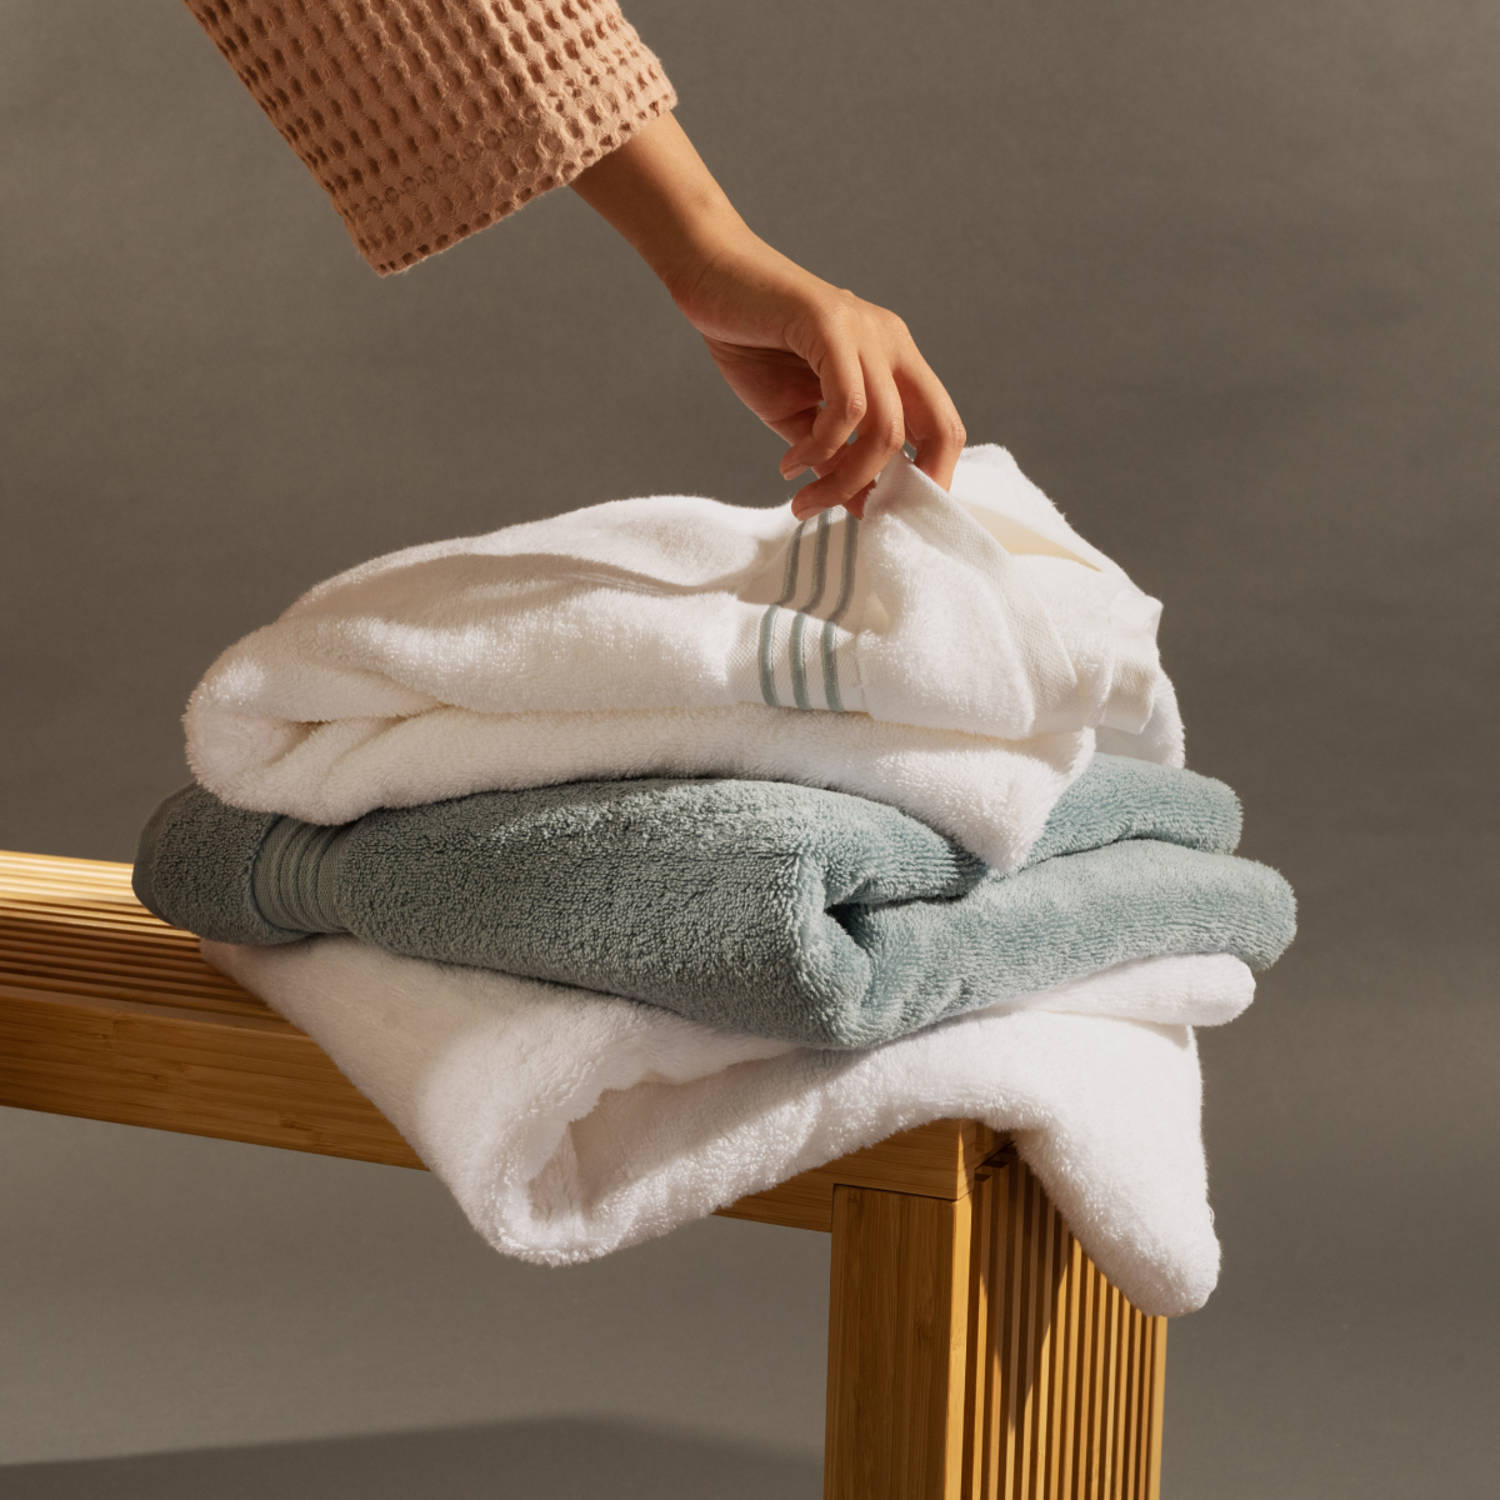 What is GSM? Here’s why it matters for towels and fabrics